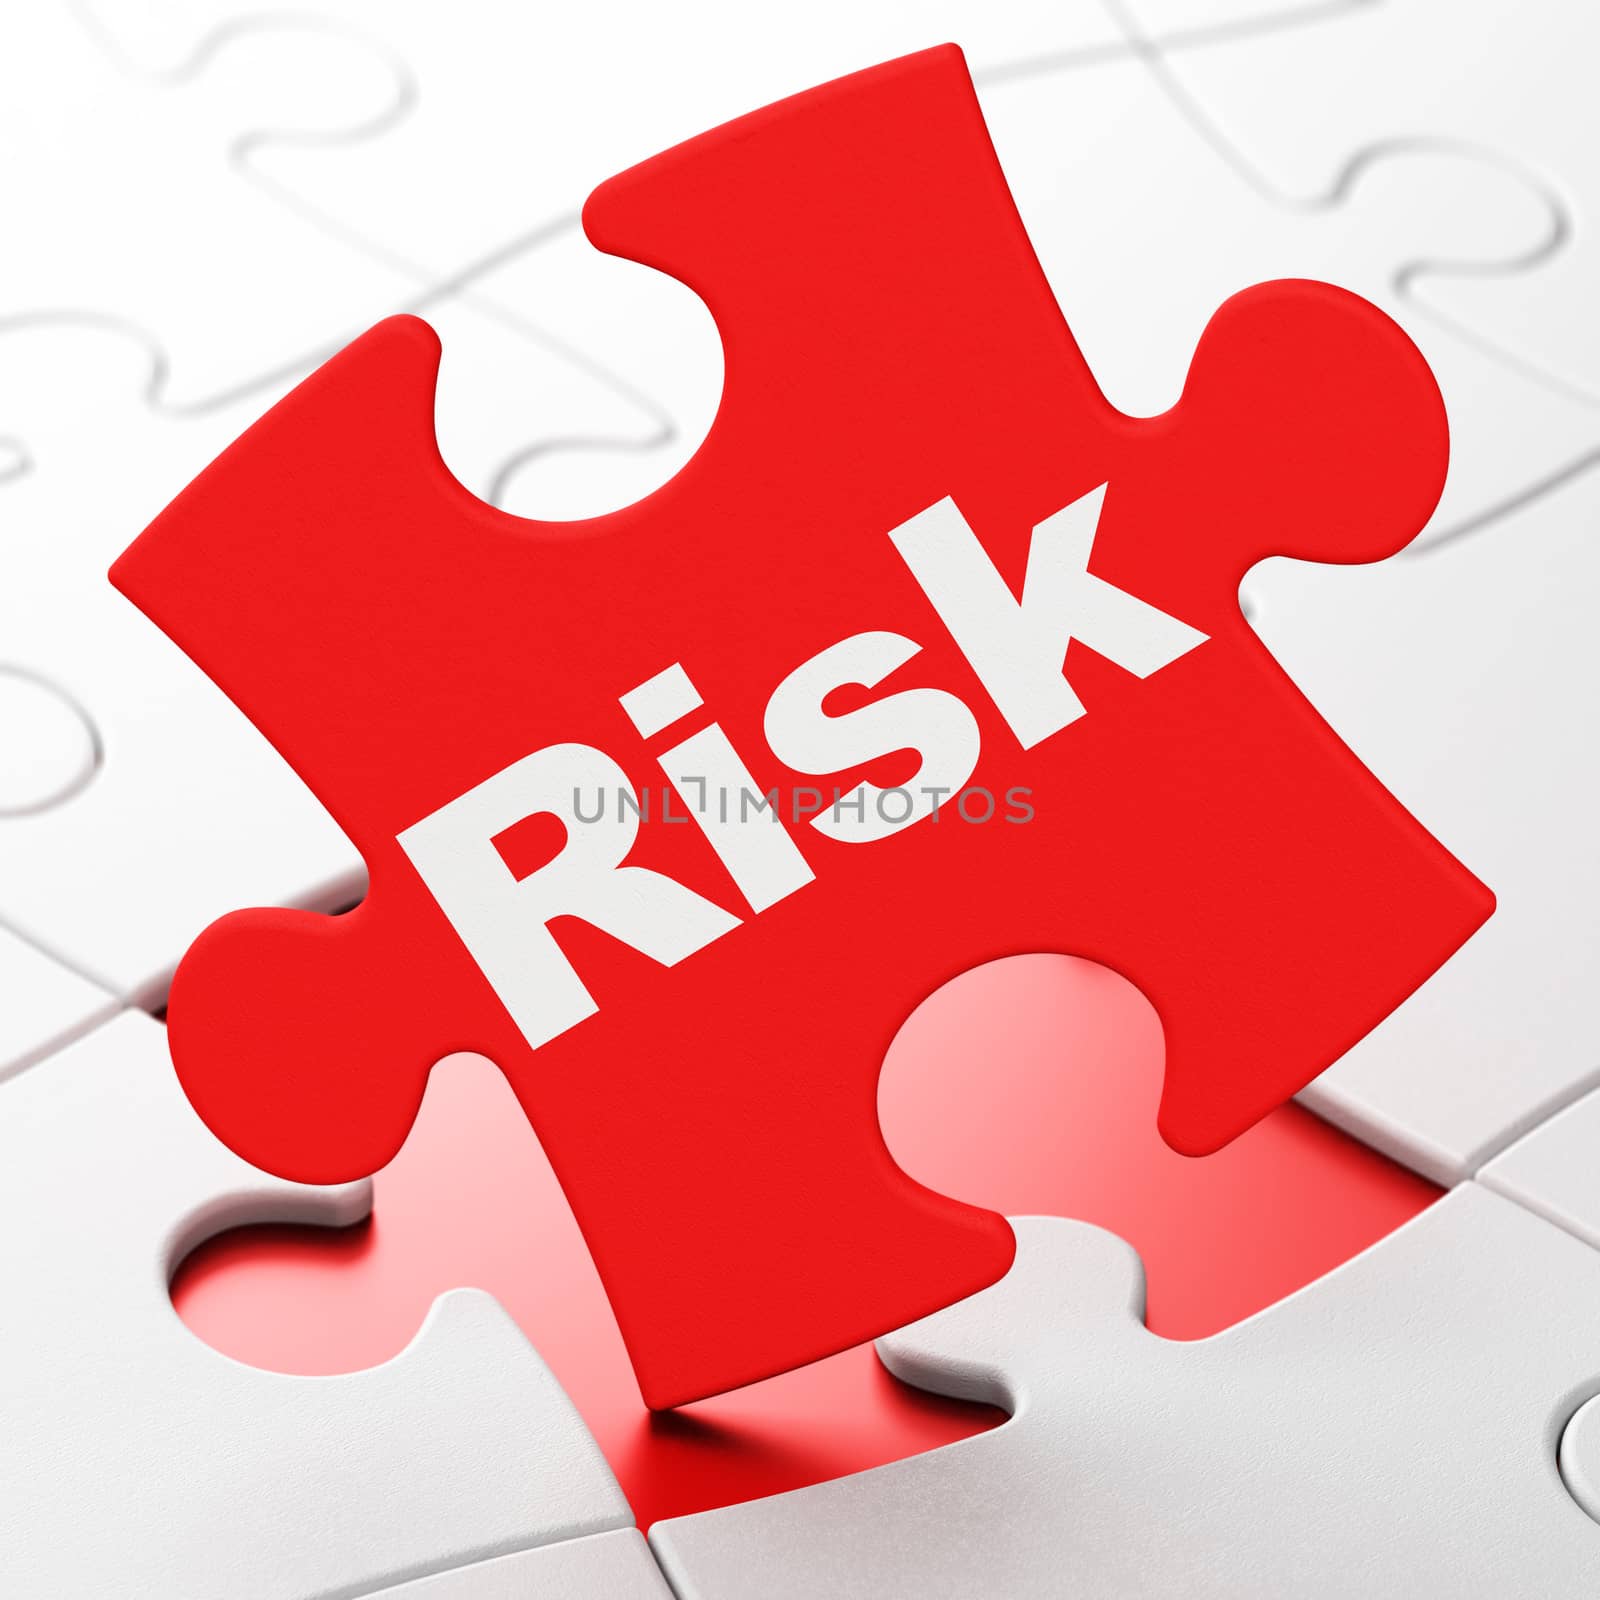 Business concept: Risk on Red puzzle pieces background, 3D rendering